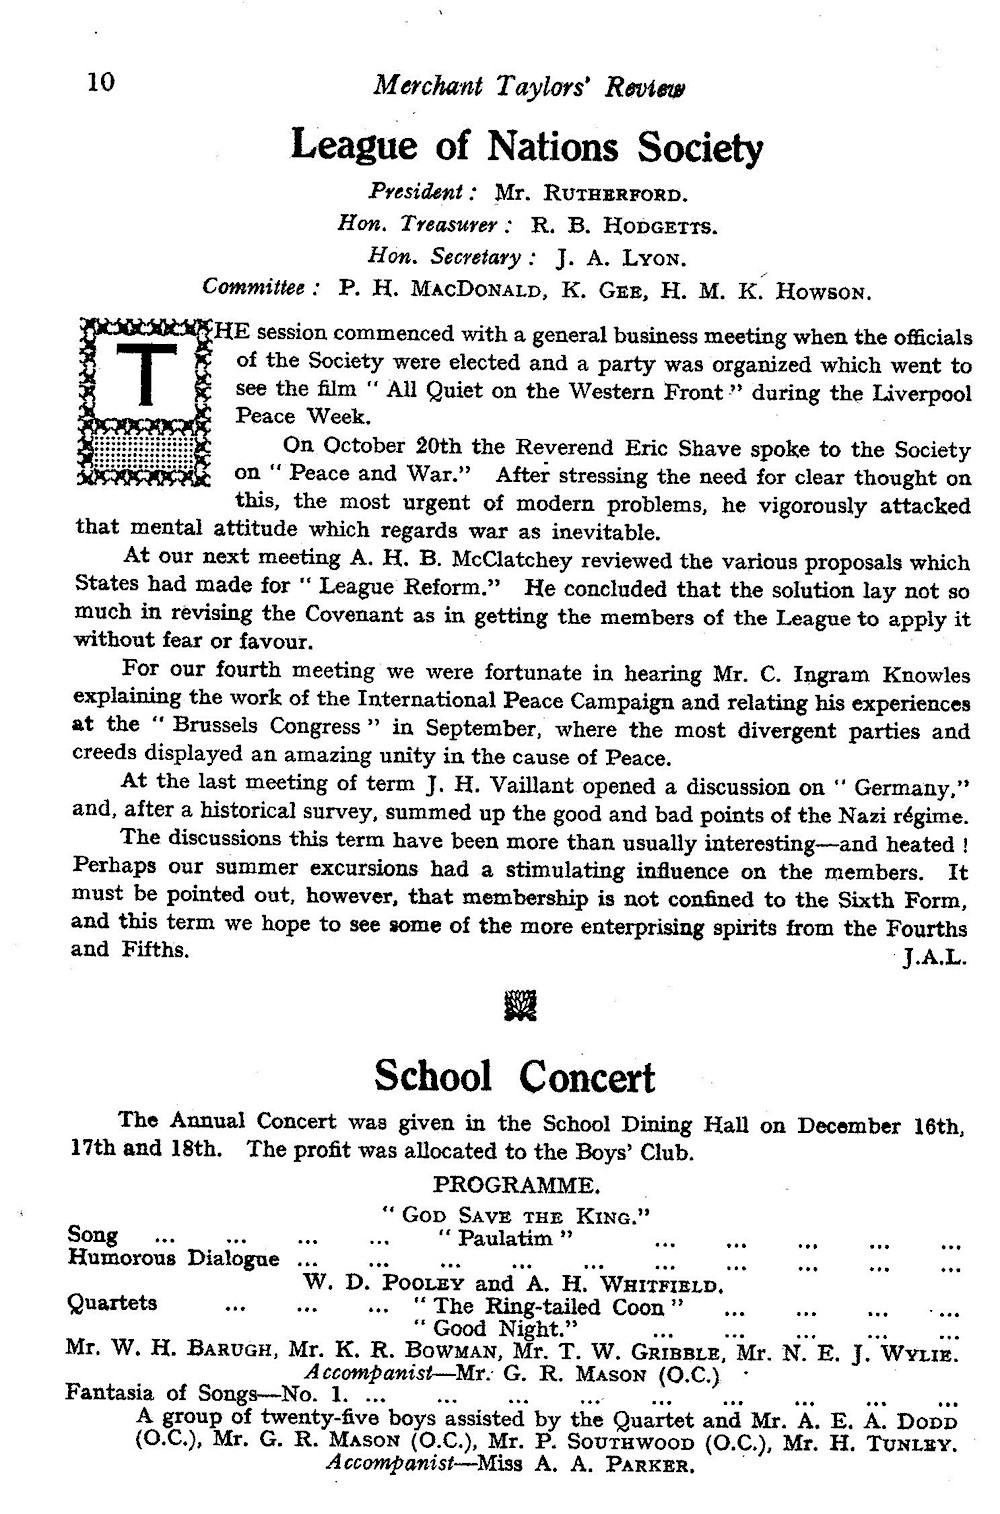 Report of League of Nations Society, Feb 1937 Courtesy of Merchant Taylors’ Boys’ School